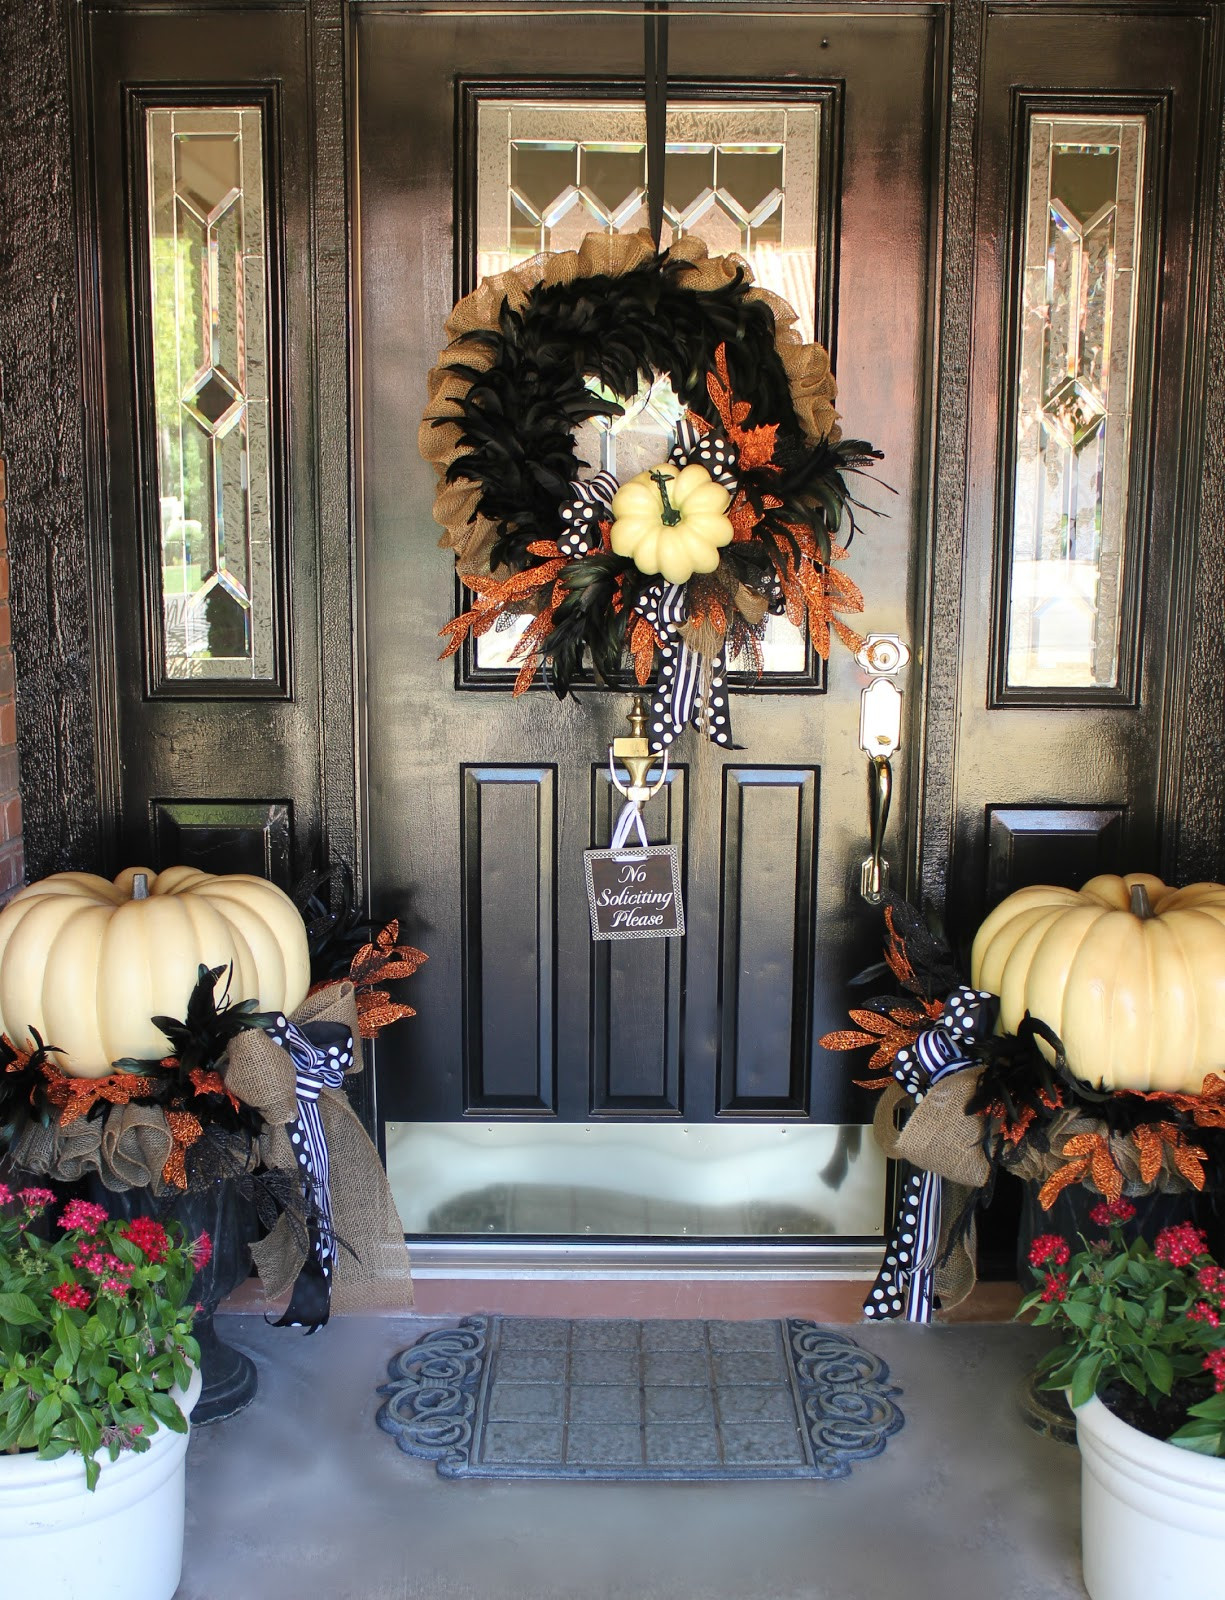 Thanksgiving Porch Decorations
 My Sister s Crazy PORCH DECORATIONS THAT EASILY